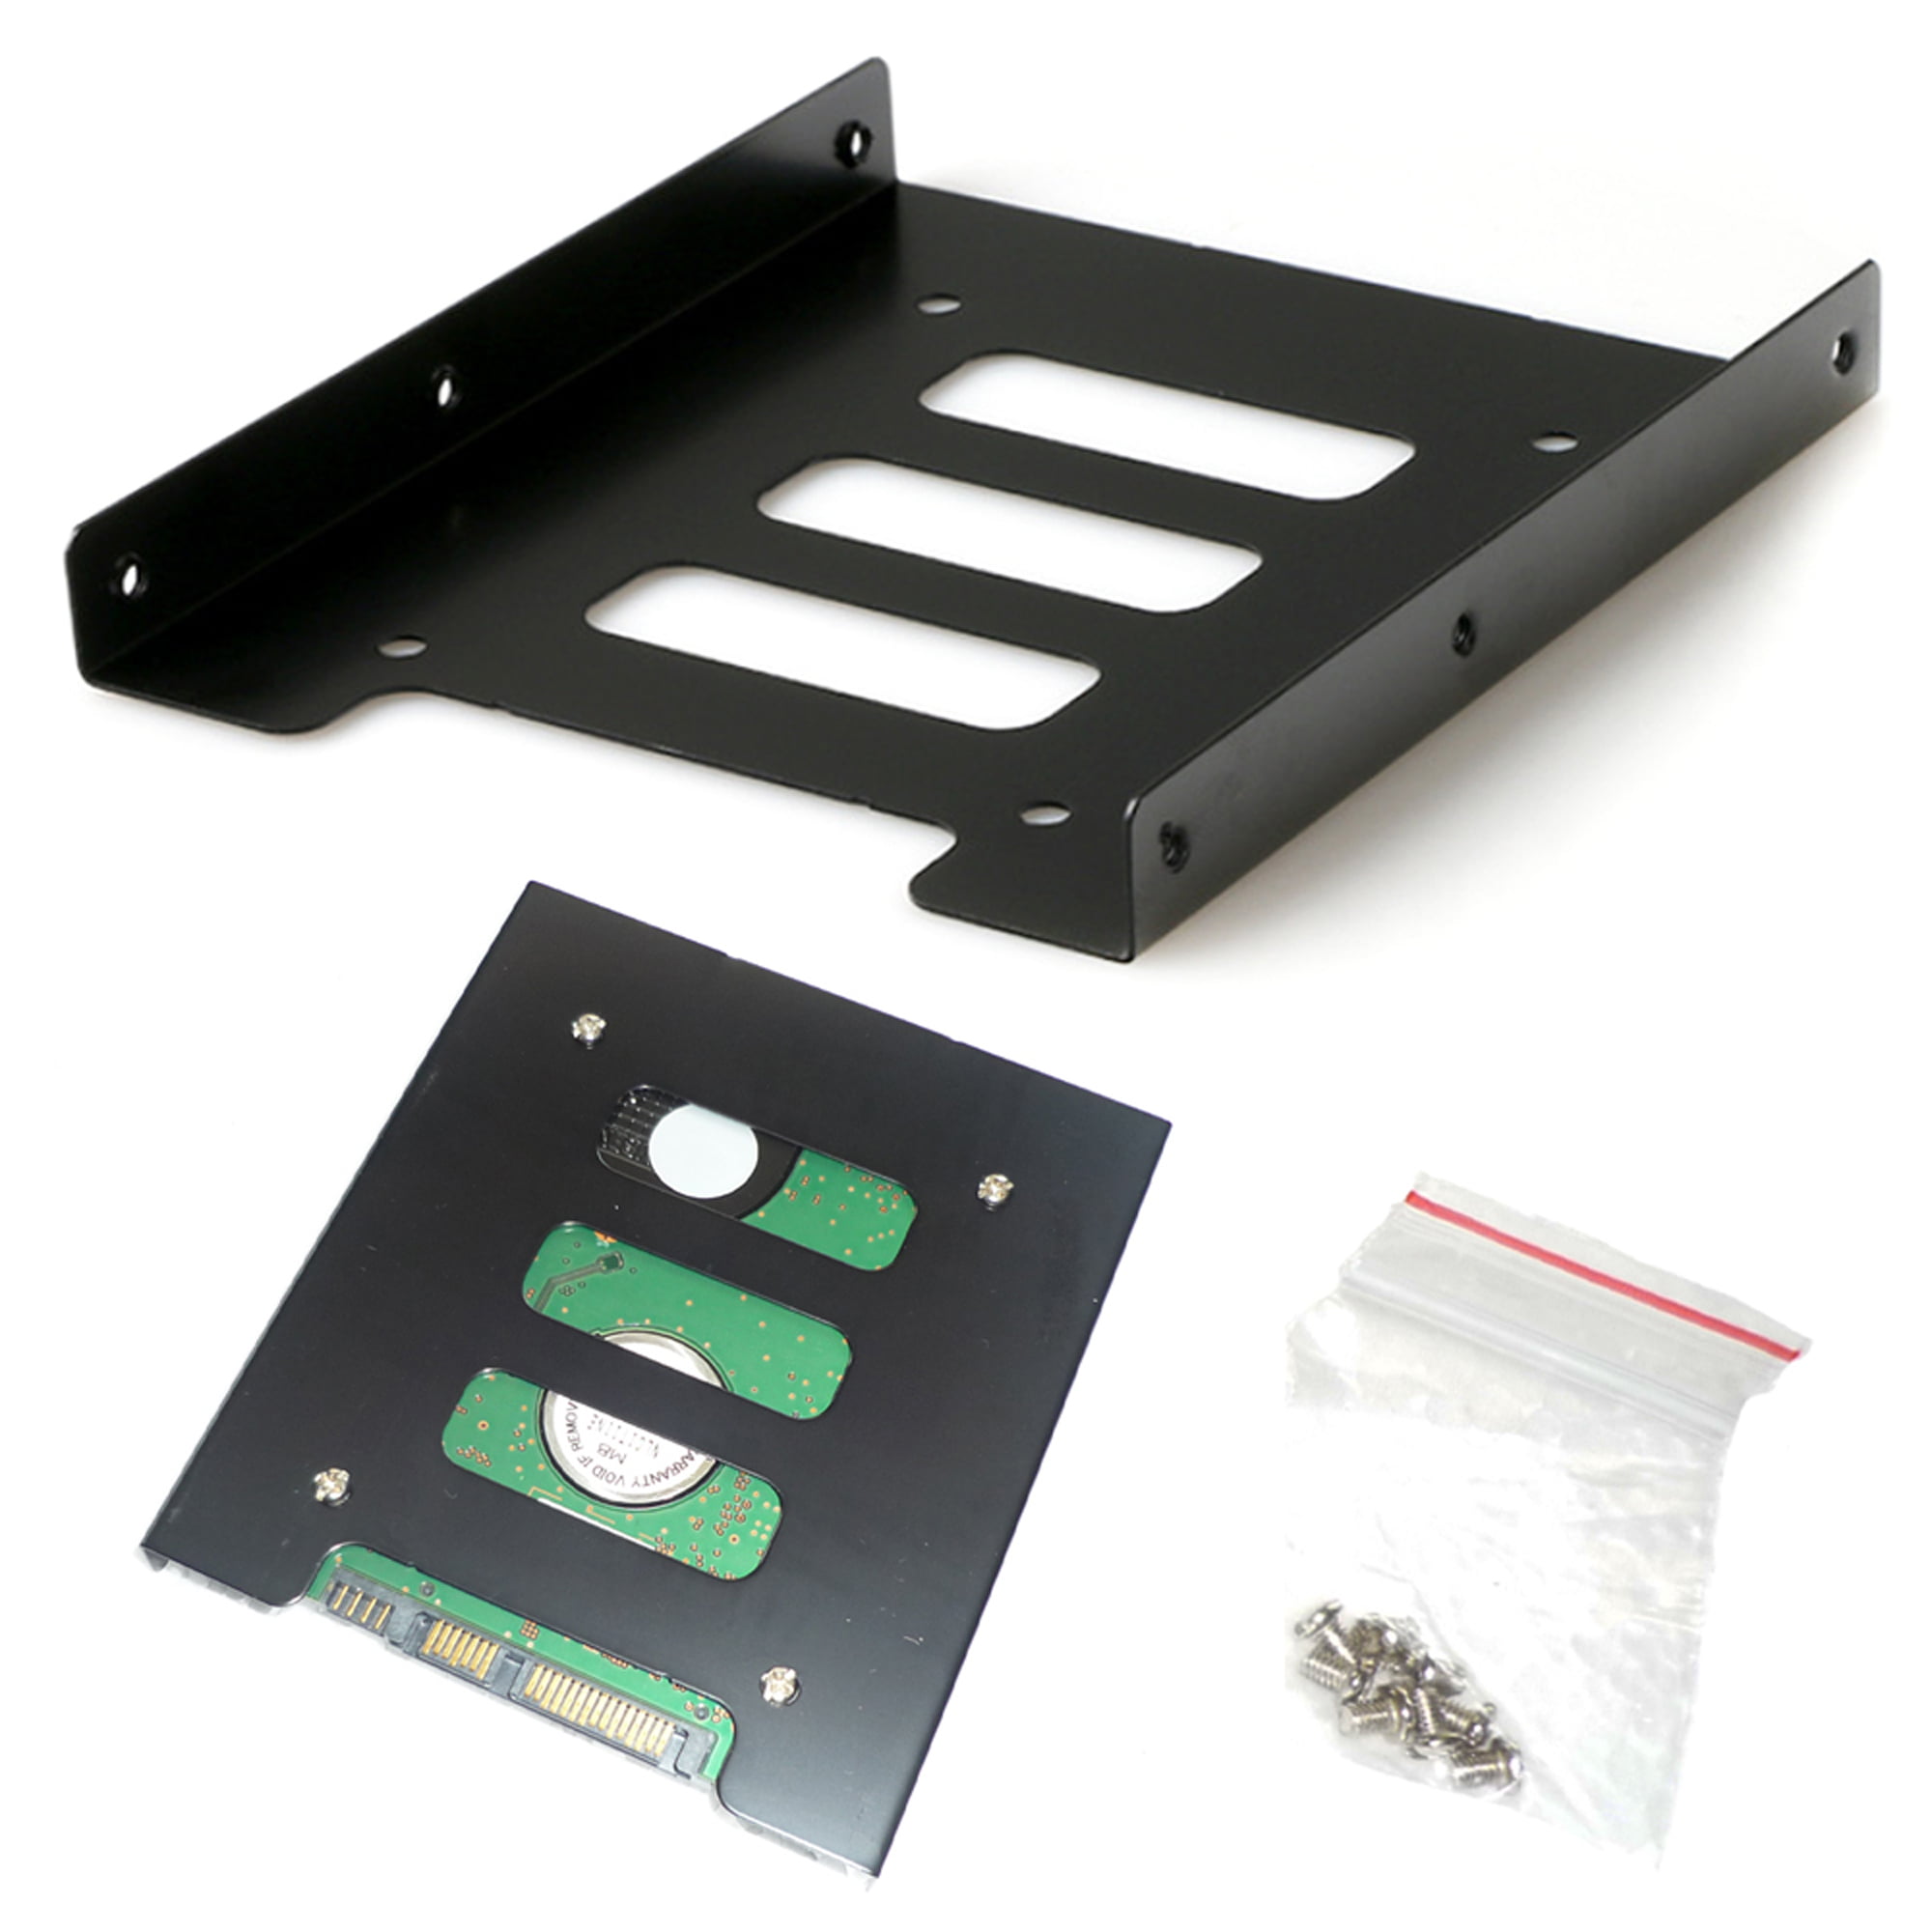 Two 2.5" SSD SATA HDD To 3.5" Mount Adapter Hard Drive Bracket Black Plastic 